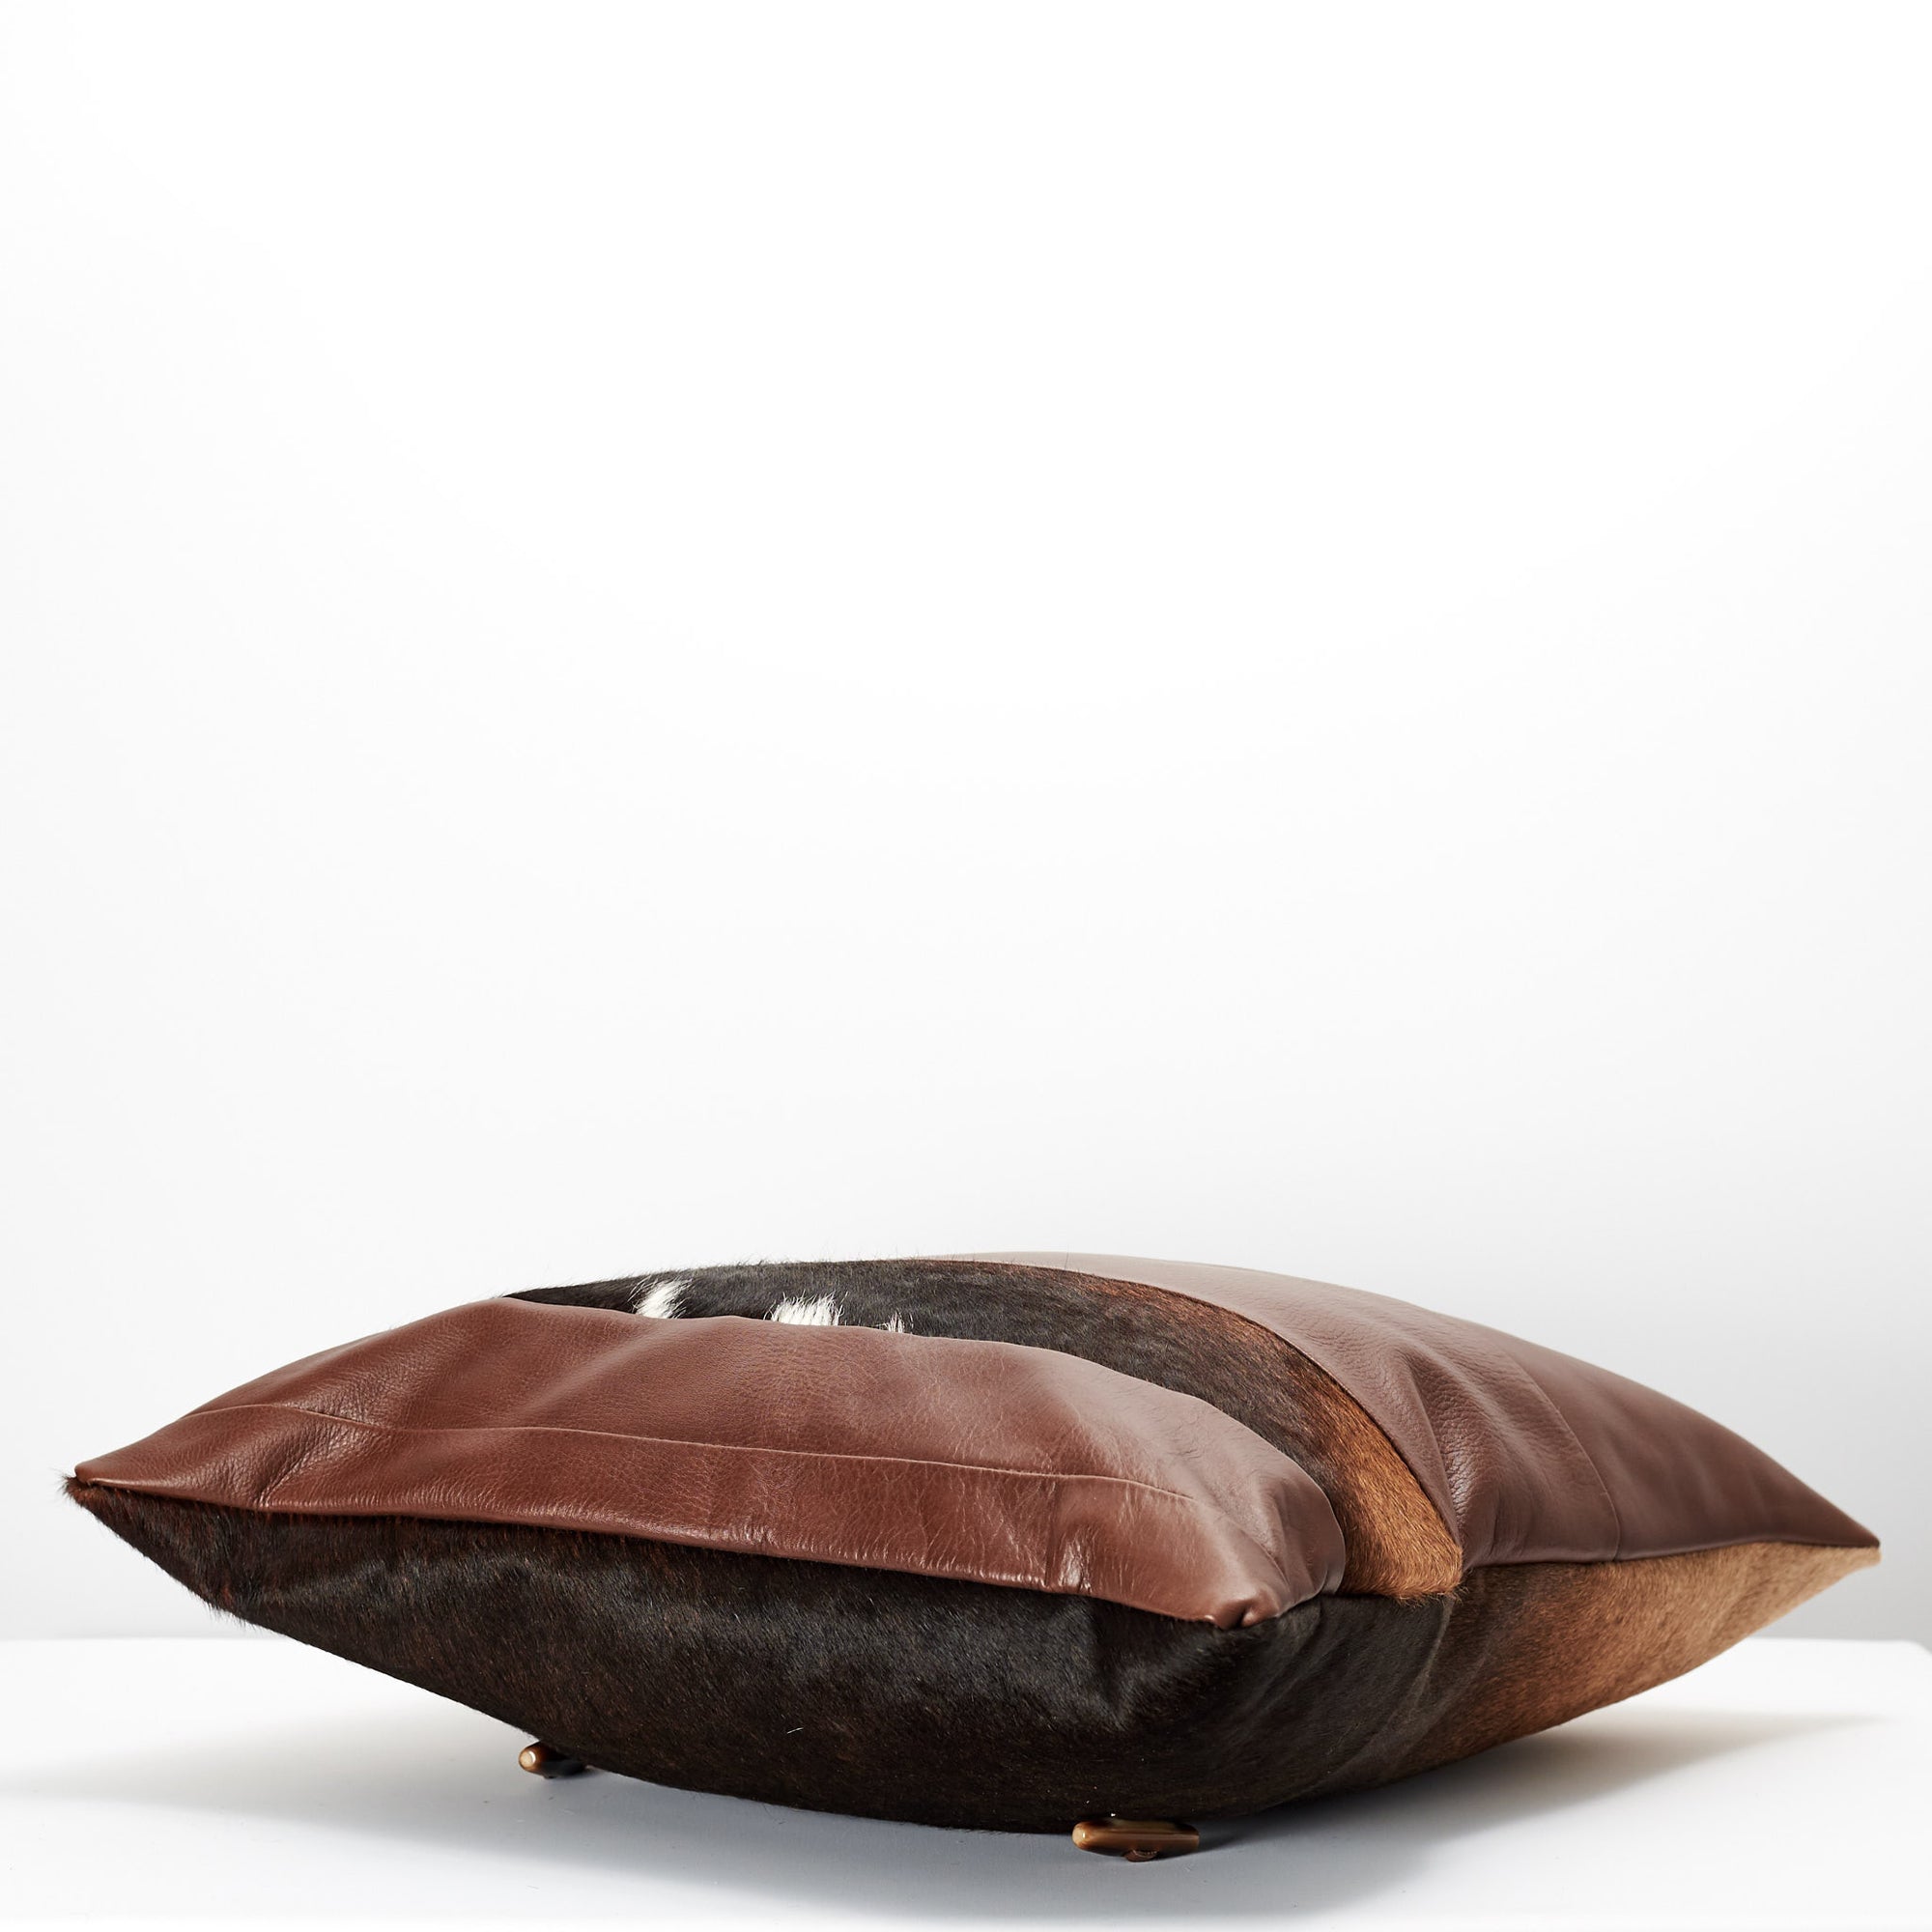 Up side down. Brown Dual Leather Cowhide Cushion. Couch decoration, lounge, bench, sofa cushion covers, custom size, pillow. 